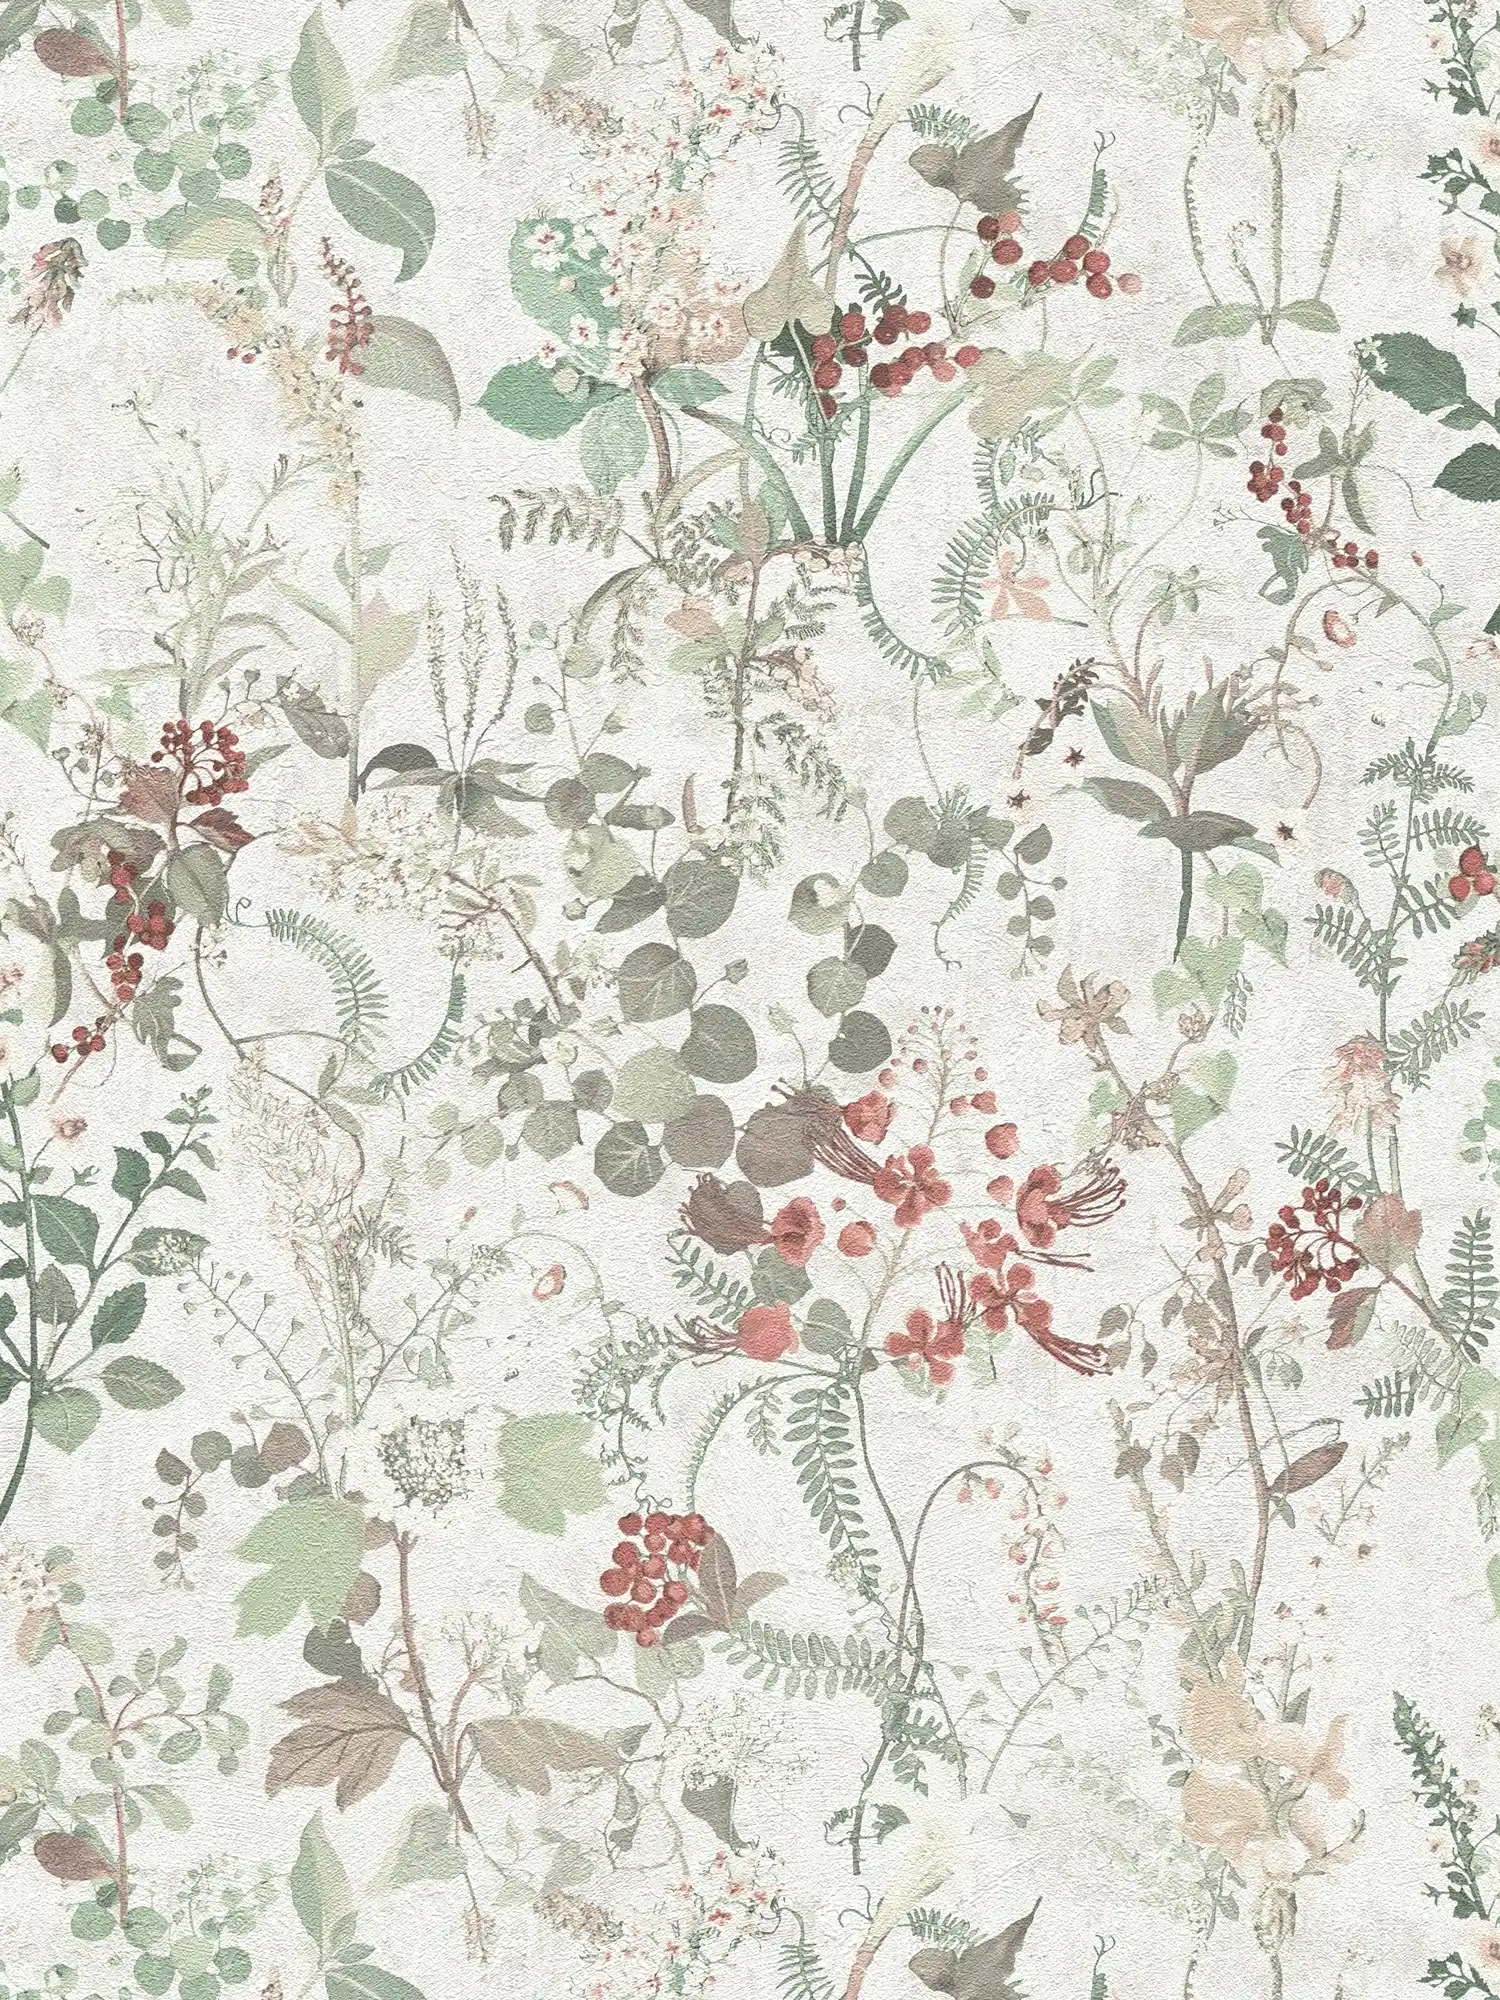 Wallpaper flowers & berries in country style - cream, red
